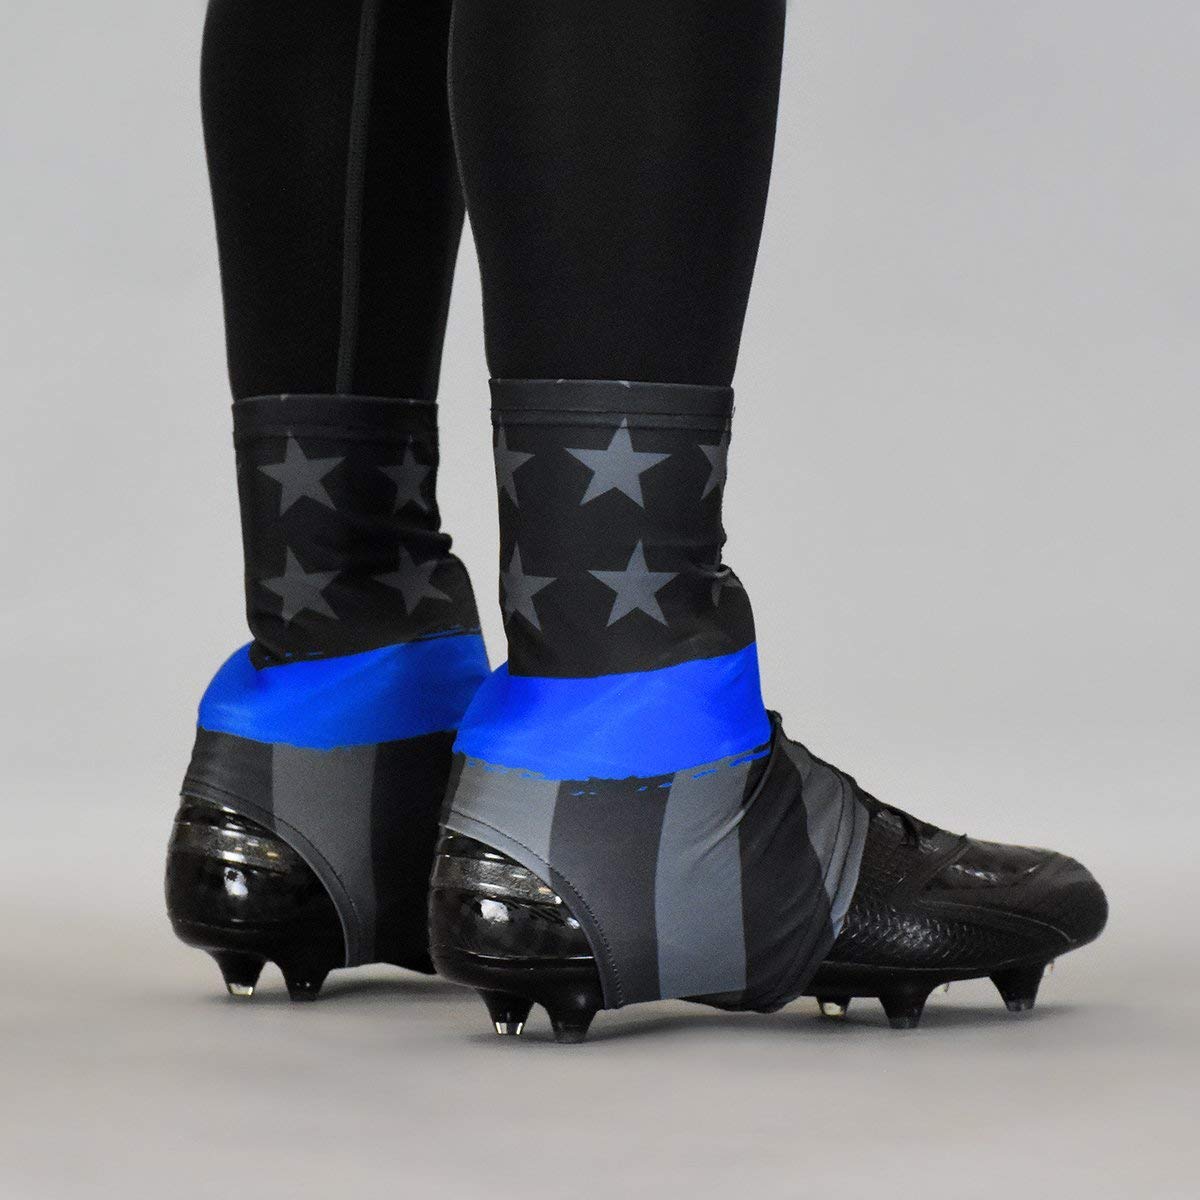 cleat spats